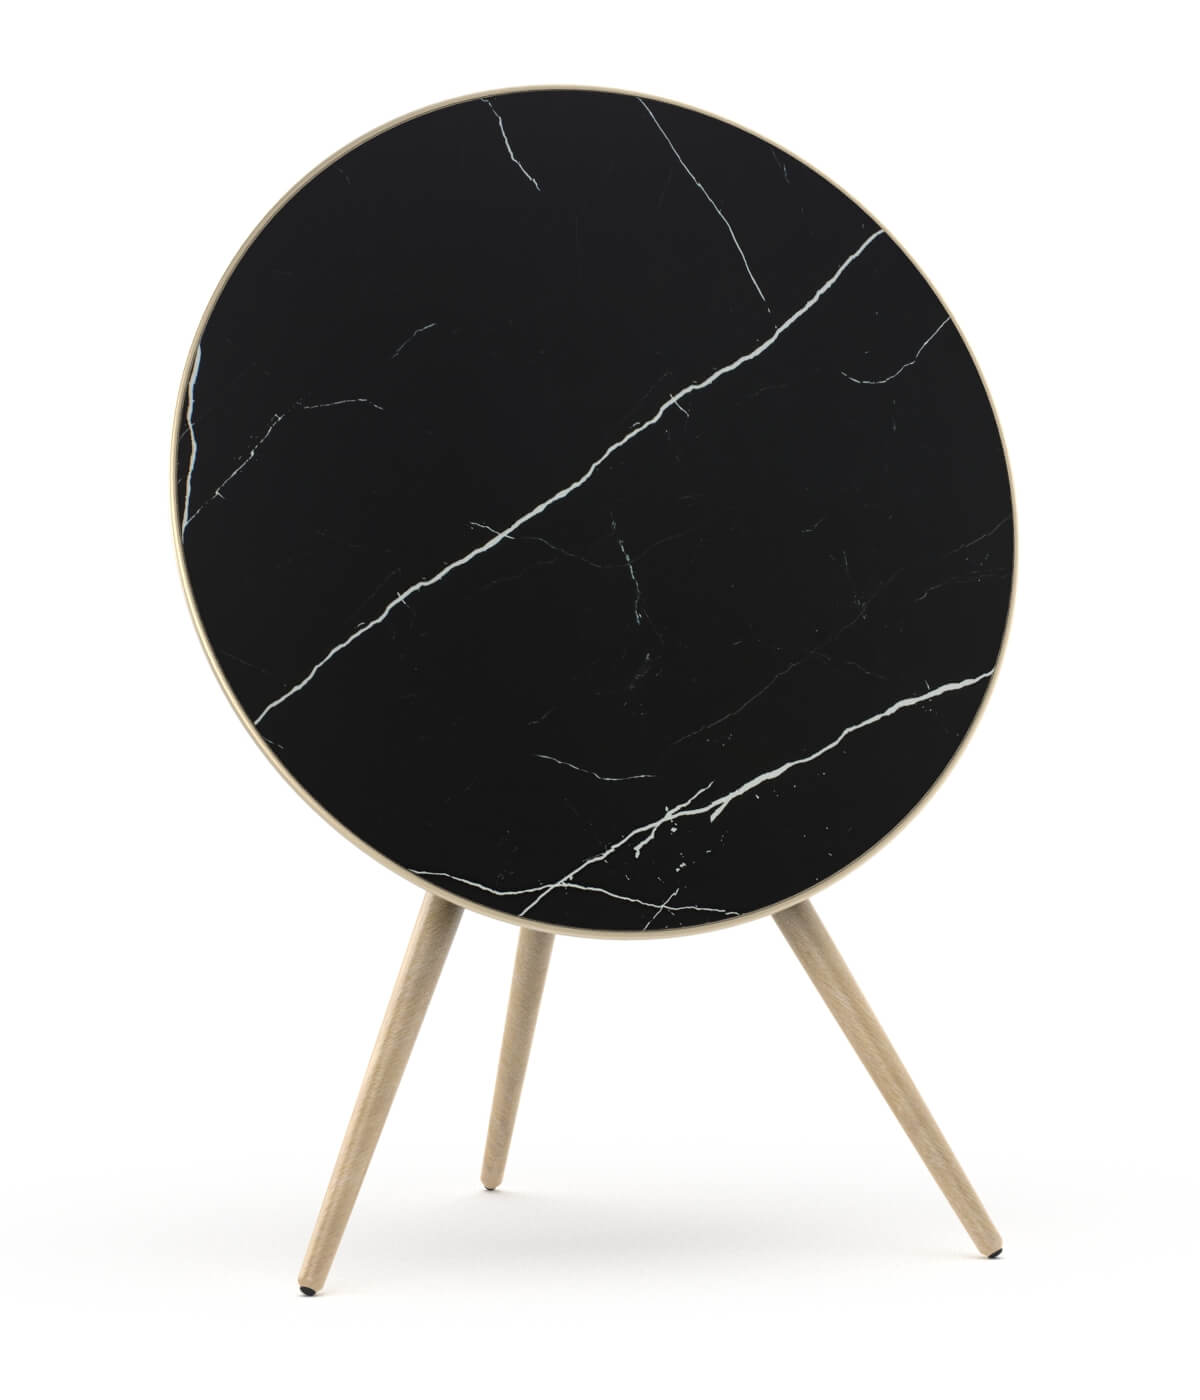 Skiniplay cover Black Marble for Bang & Olufsen Beoplay A9 and Beosound A9 speaker